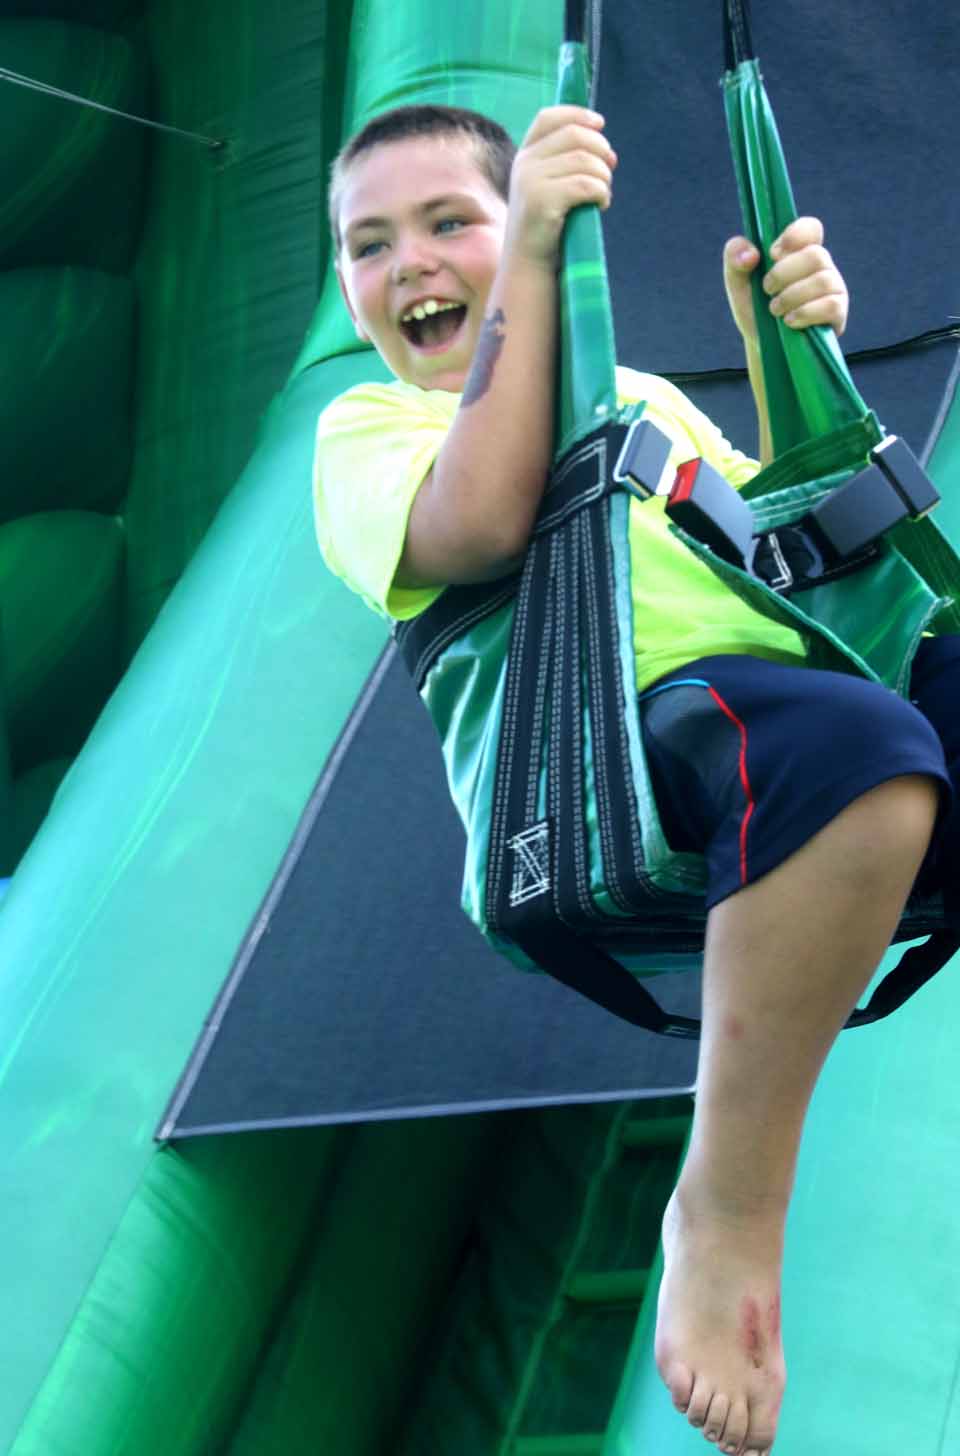 Wyatt Drake 8, of Hartwick lets out a whoop as he slides down the Amazon Zip Line, one of the carnival rides offered today and Sunday at the Hartwick Field Days.  The parade is at 6 p.m. -- you can still make it if you hurry.  Fireworks are at dusk, and the Jason Wicks Band plays to 11.  (Jim Kevlin/AllOTSEGO.com)